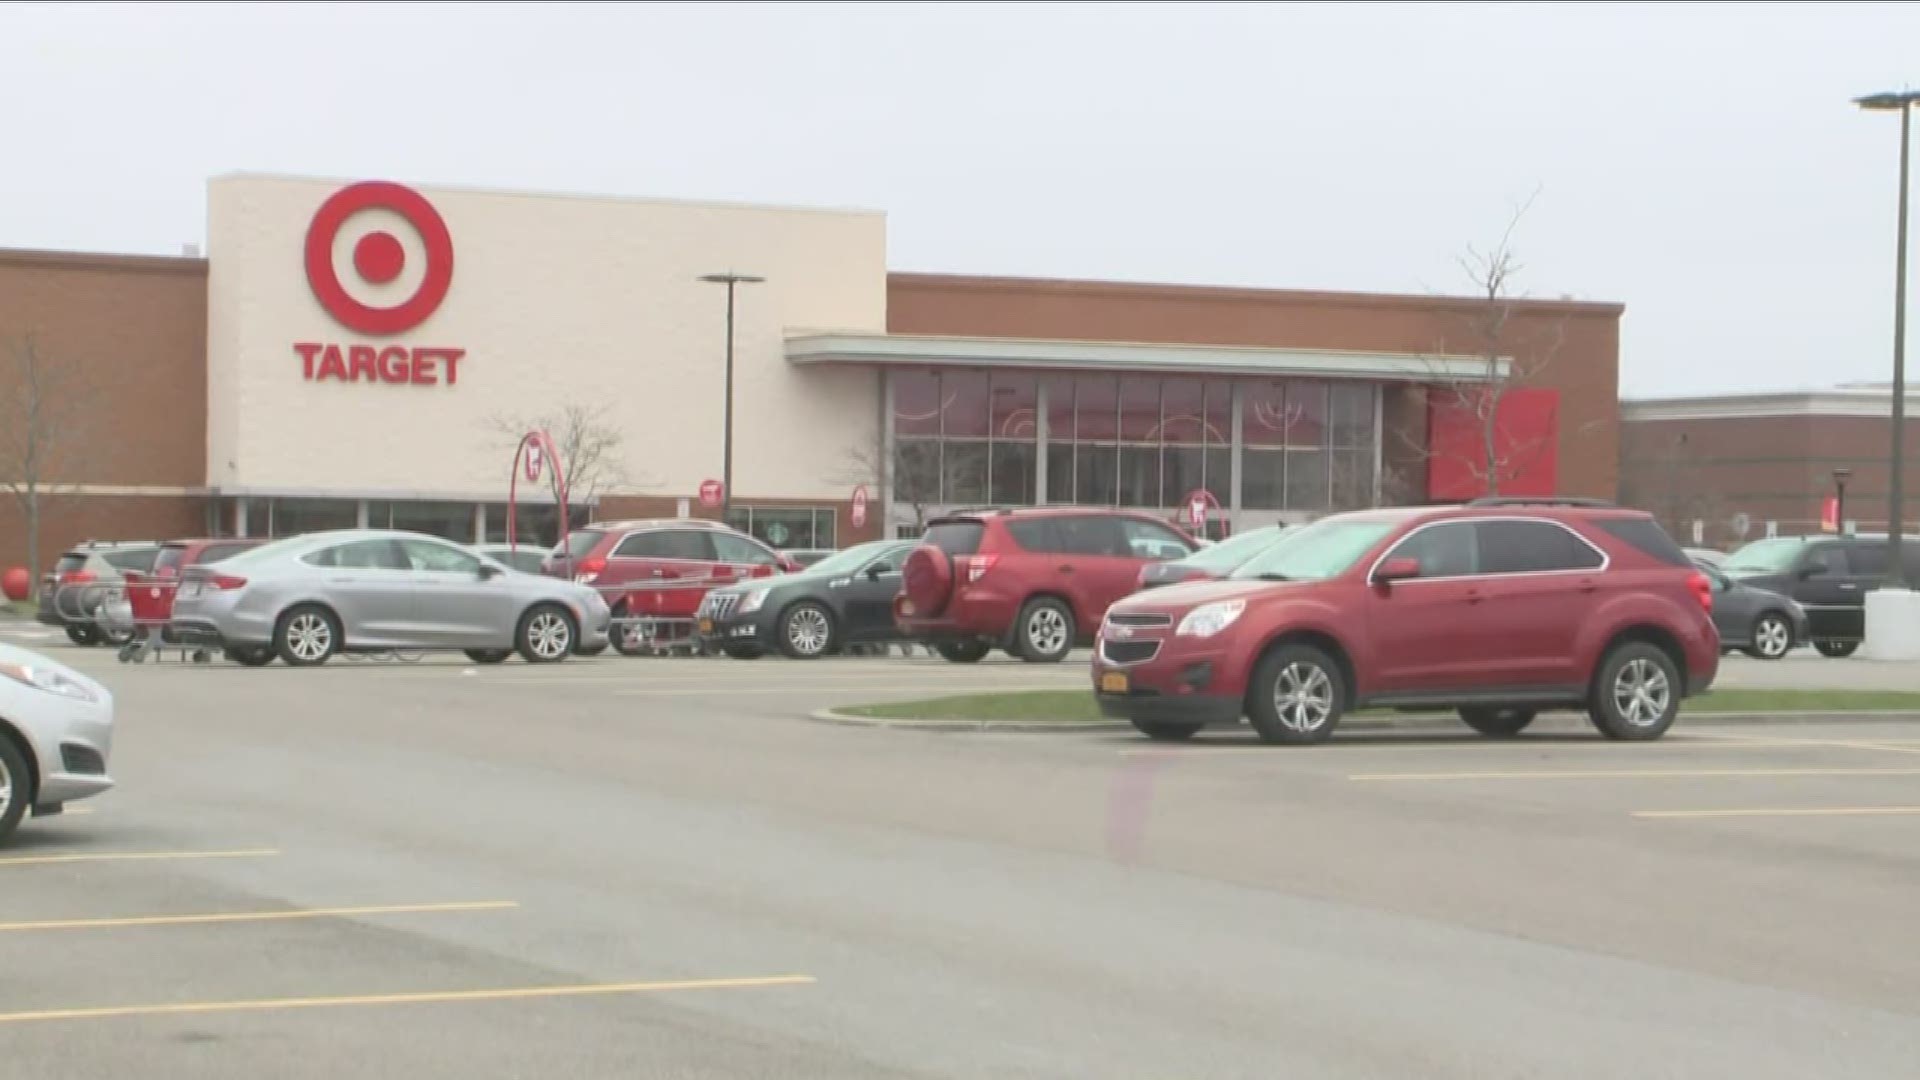 Target has already said it's not handling reusable bags … if customers have them, they will have to bag their items themselves.